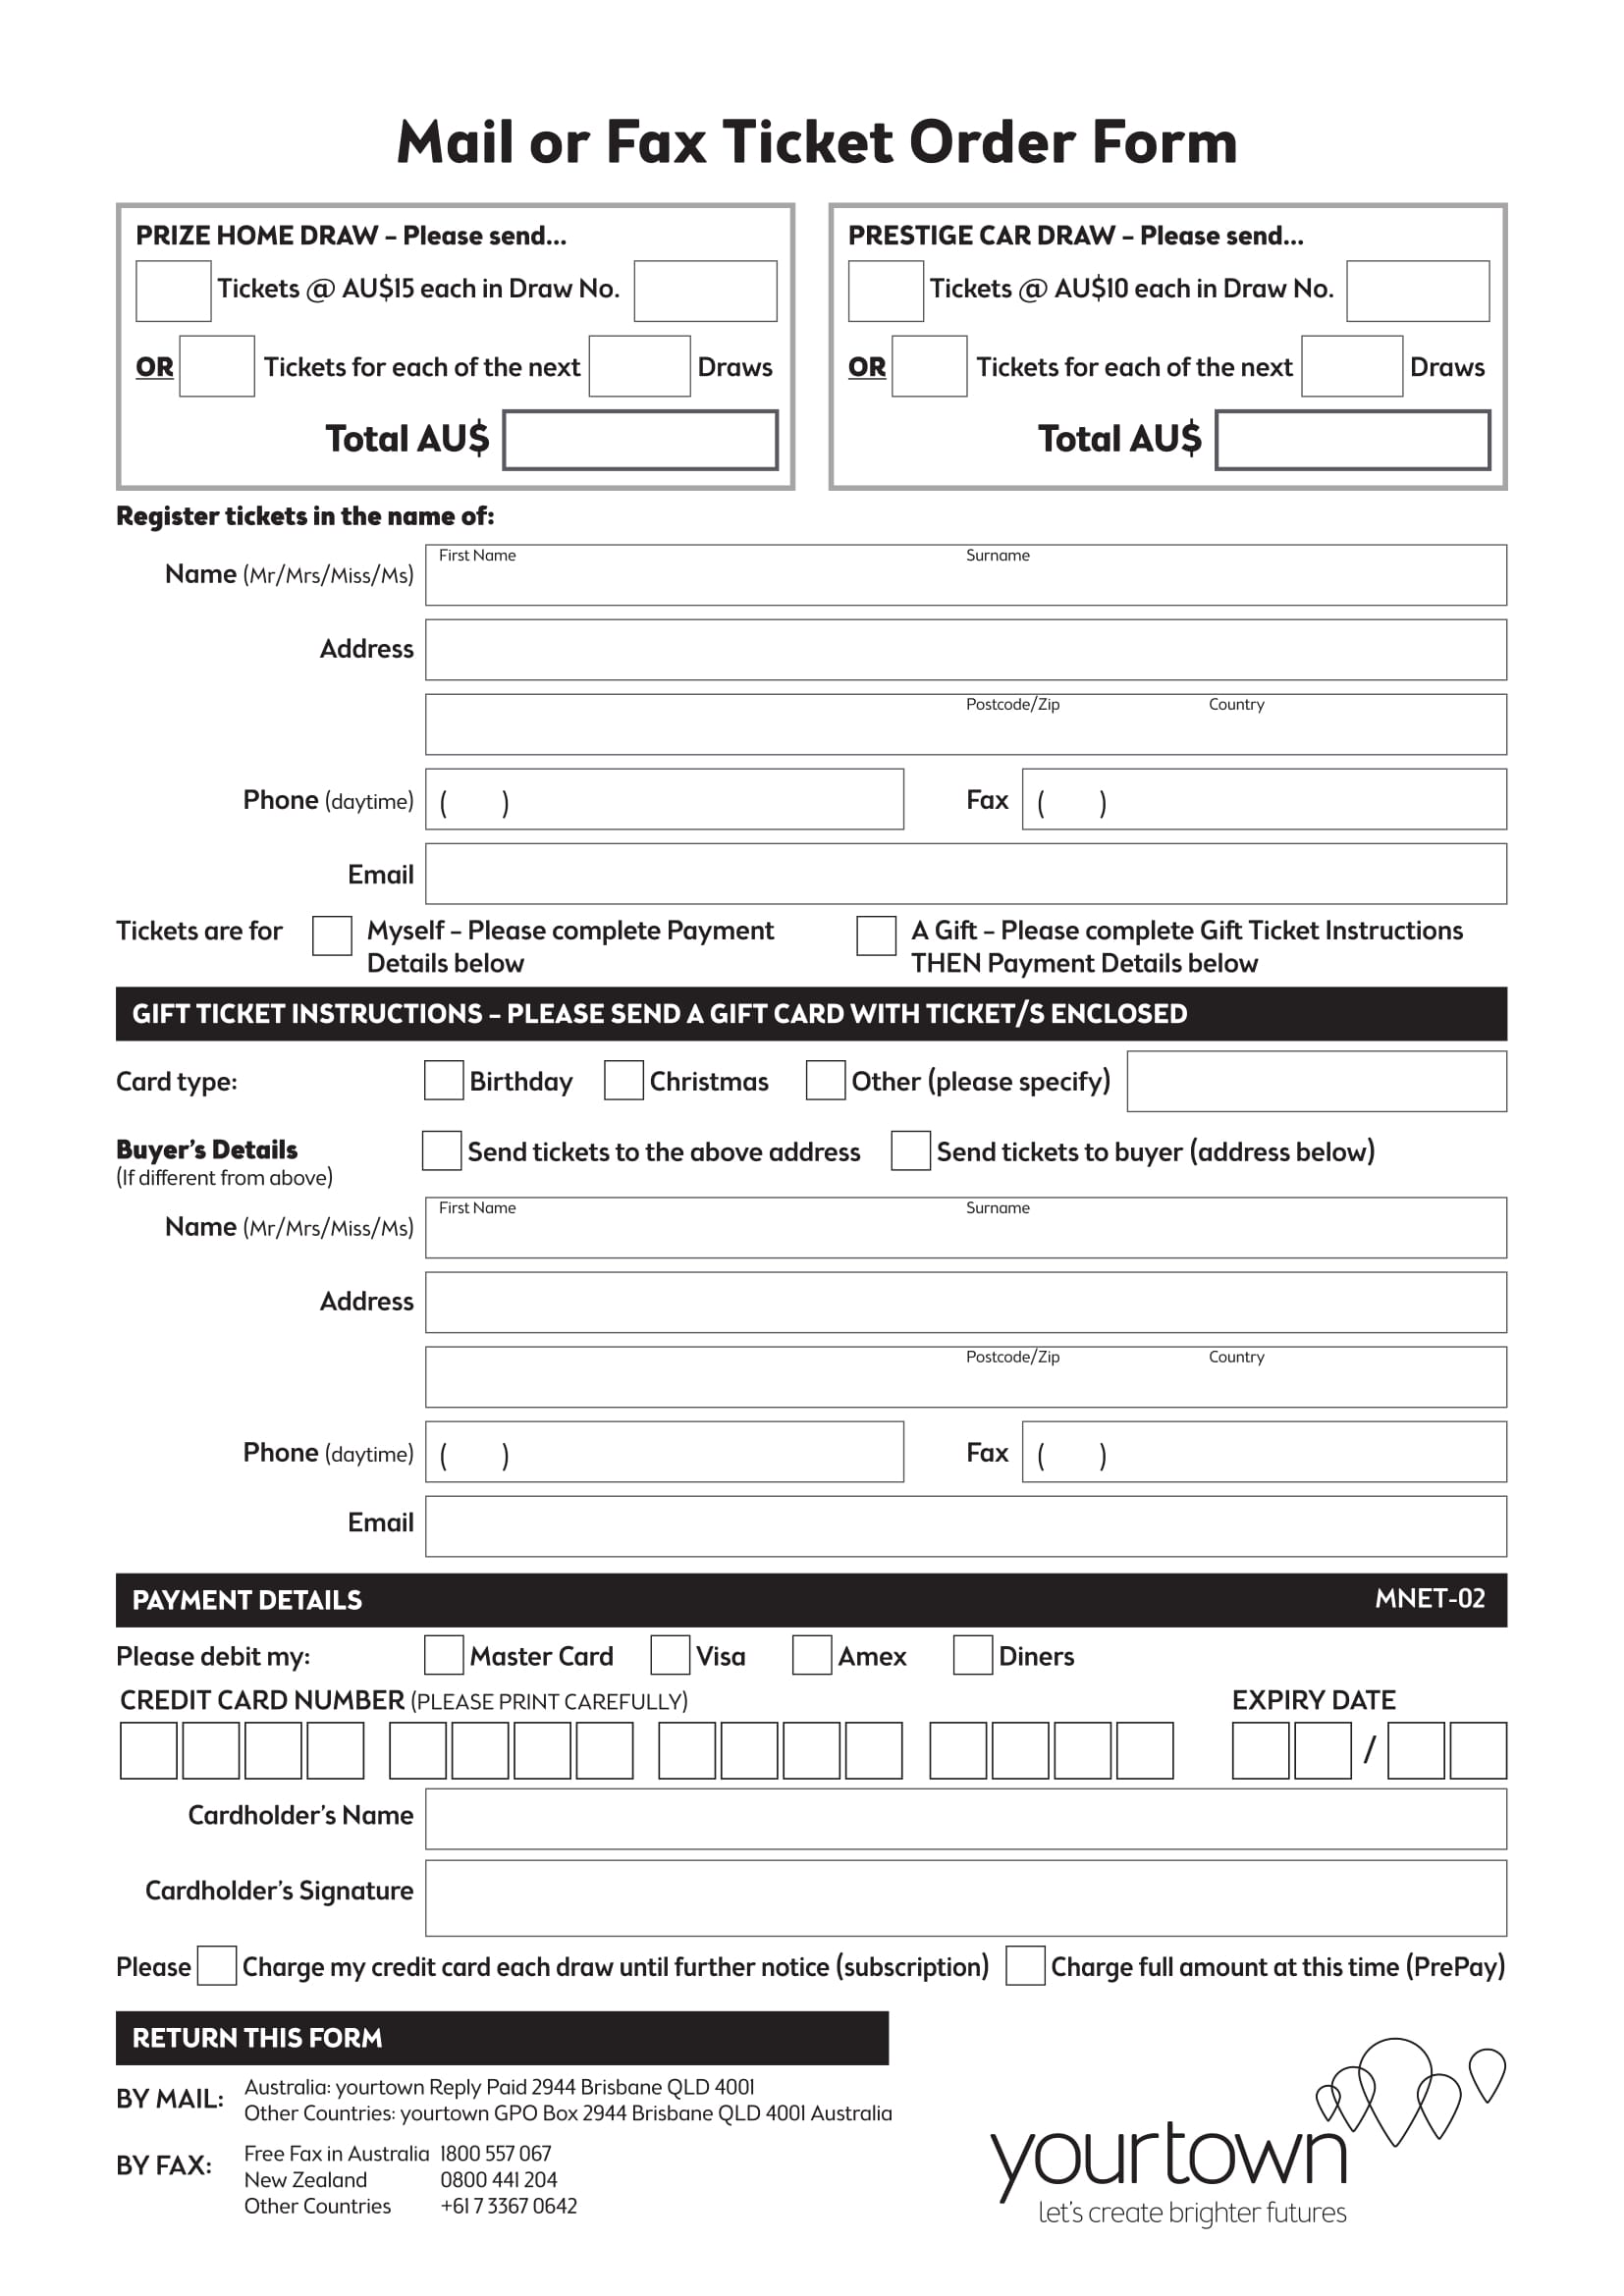 fax ticket order form 1